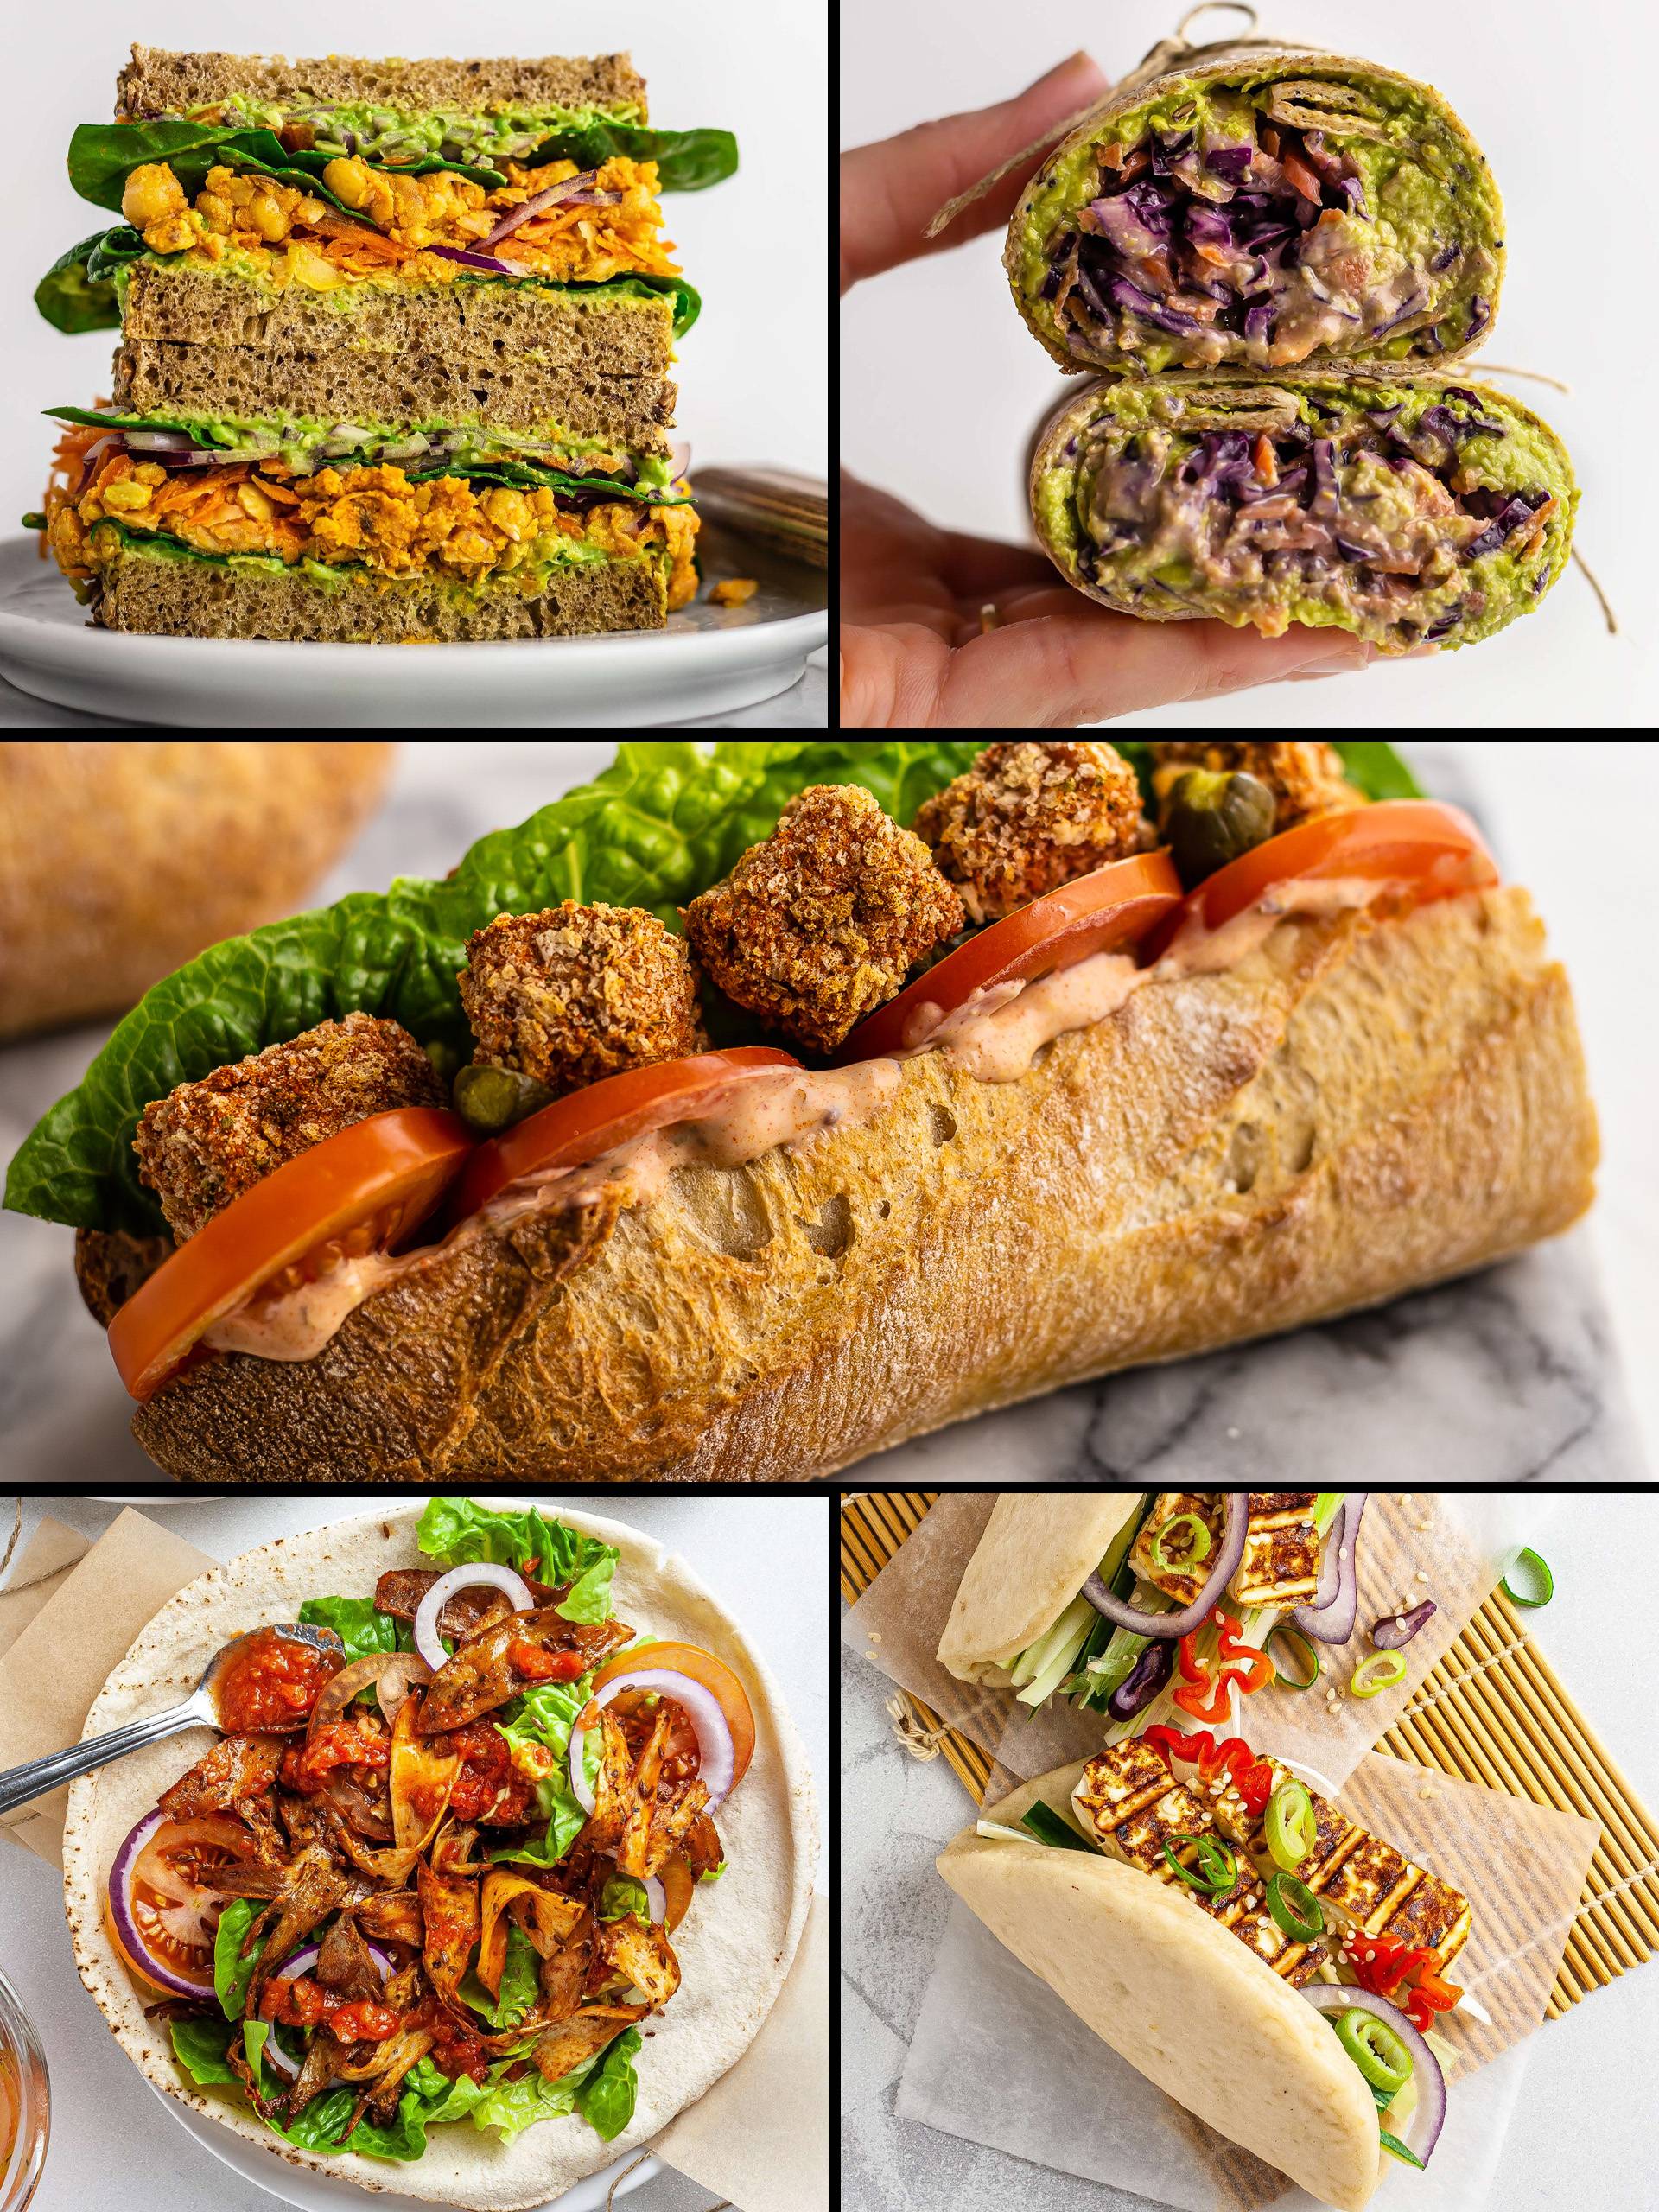 7 Healthy Vegan Sandwiches for a Satisfying Lunch